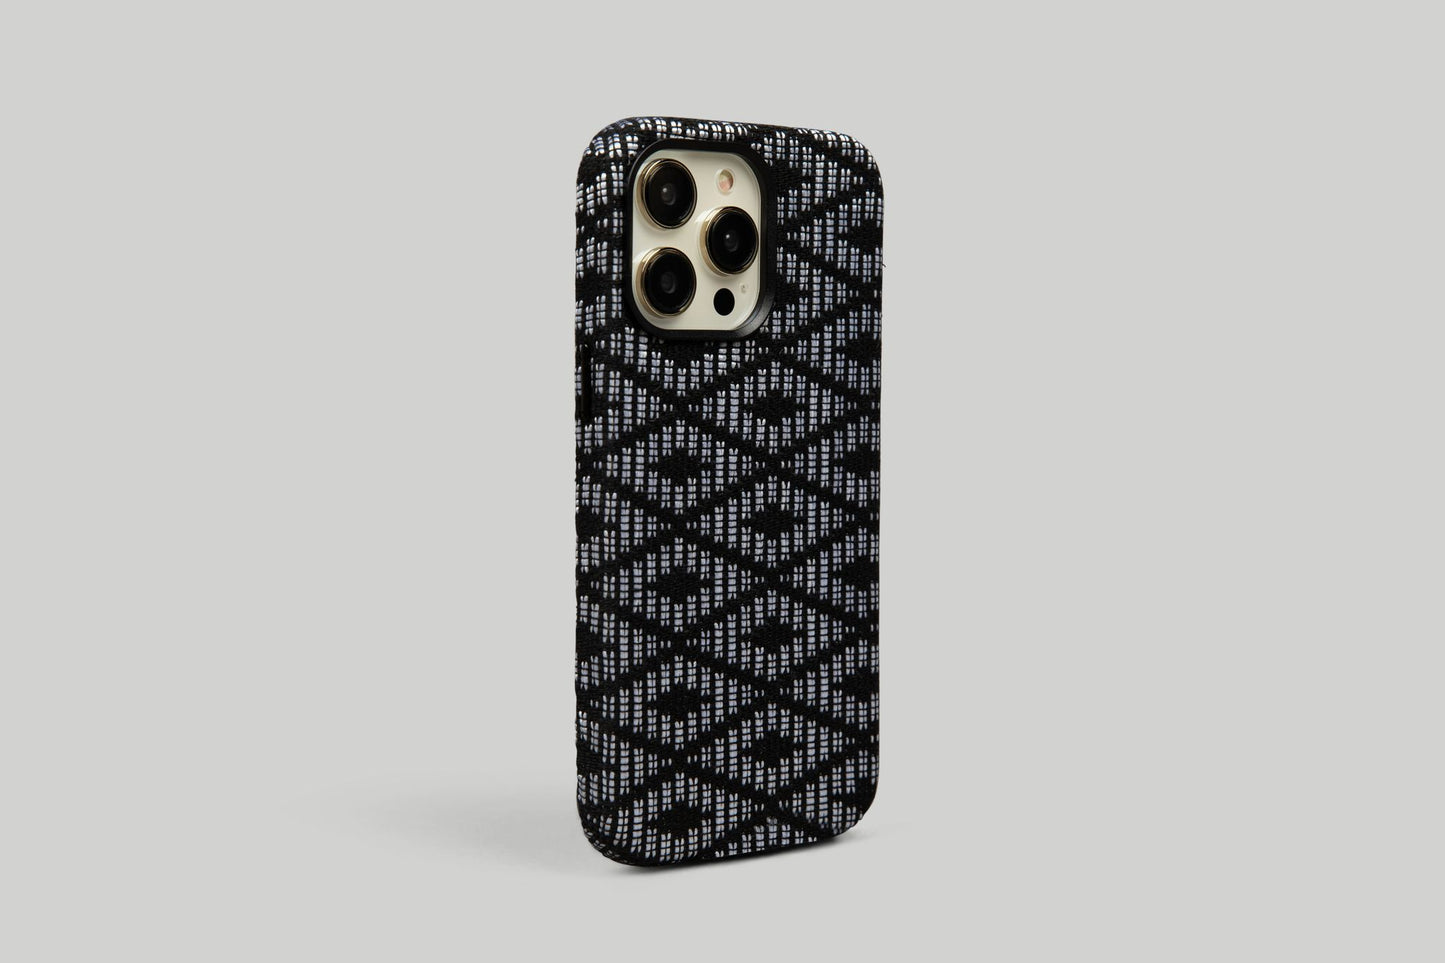 Zulu Zigzag phone case with black and white patterns against a minimalist grey backdrop, embodying timeless style for iPhone 12, 13, and 14 Pro Max, blending with any ensemble.